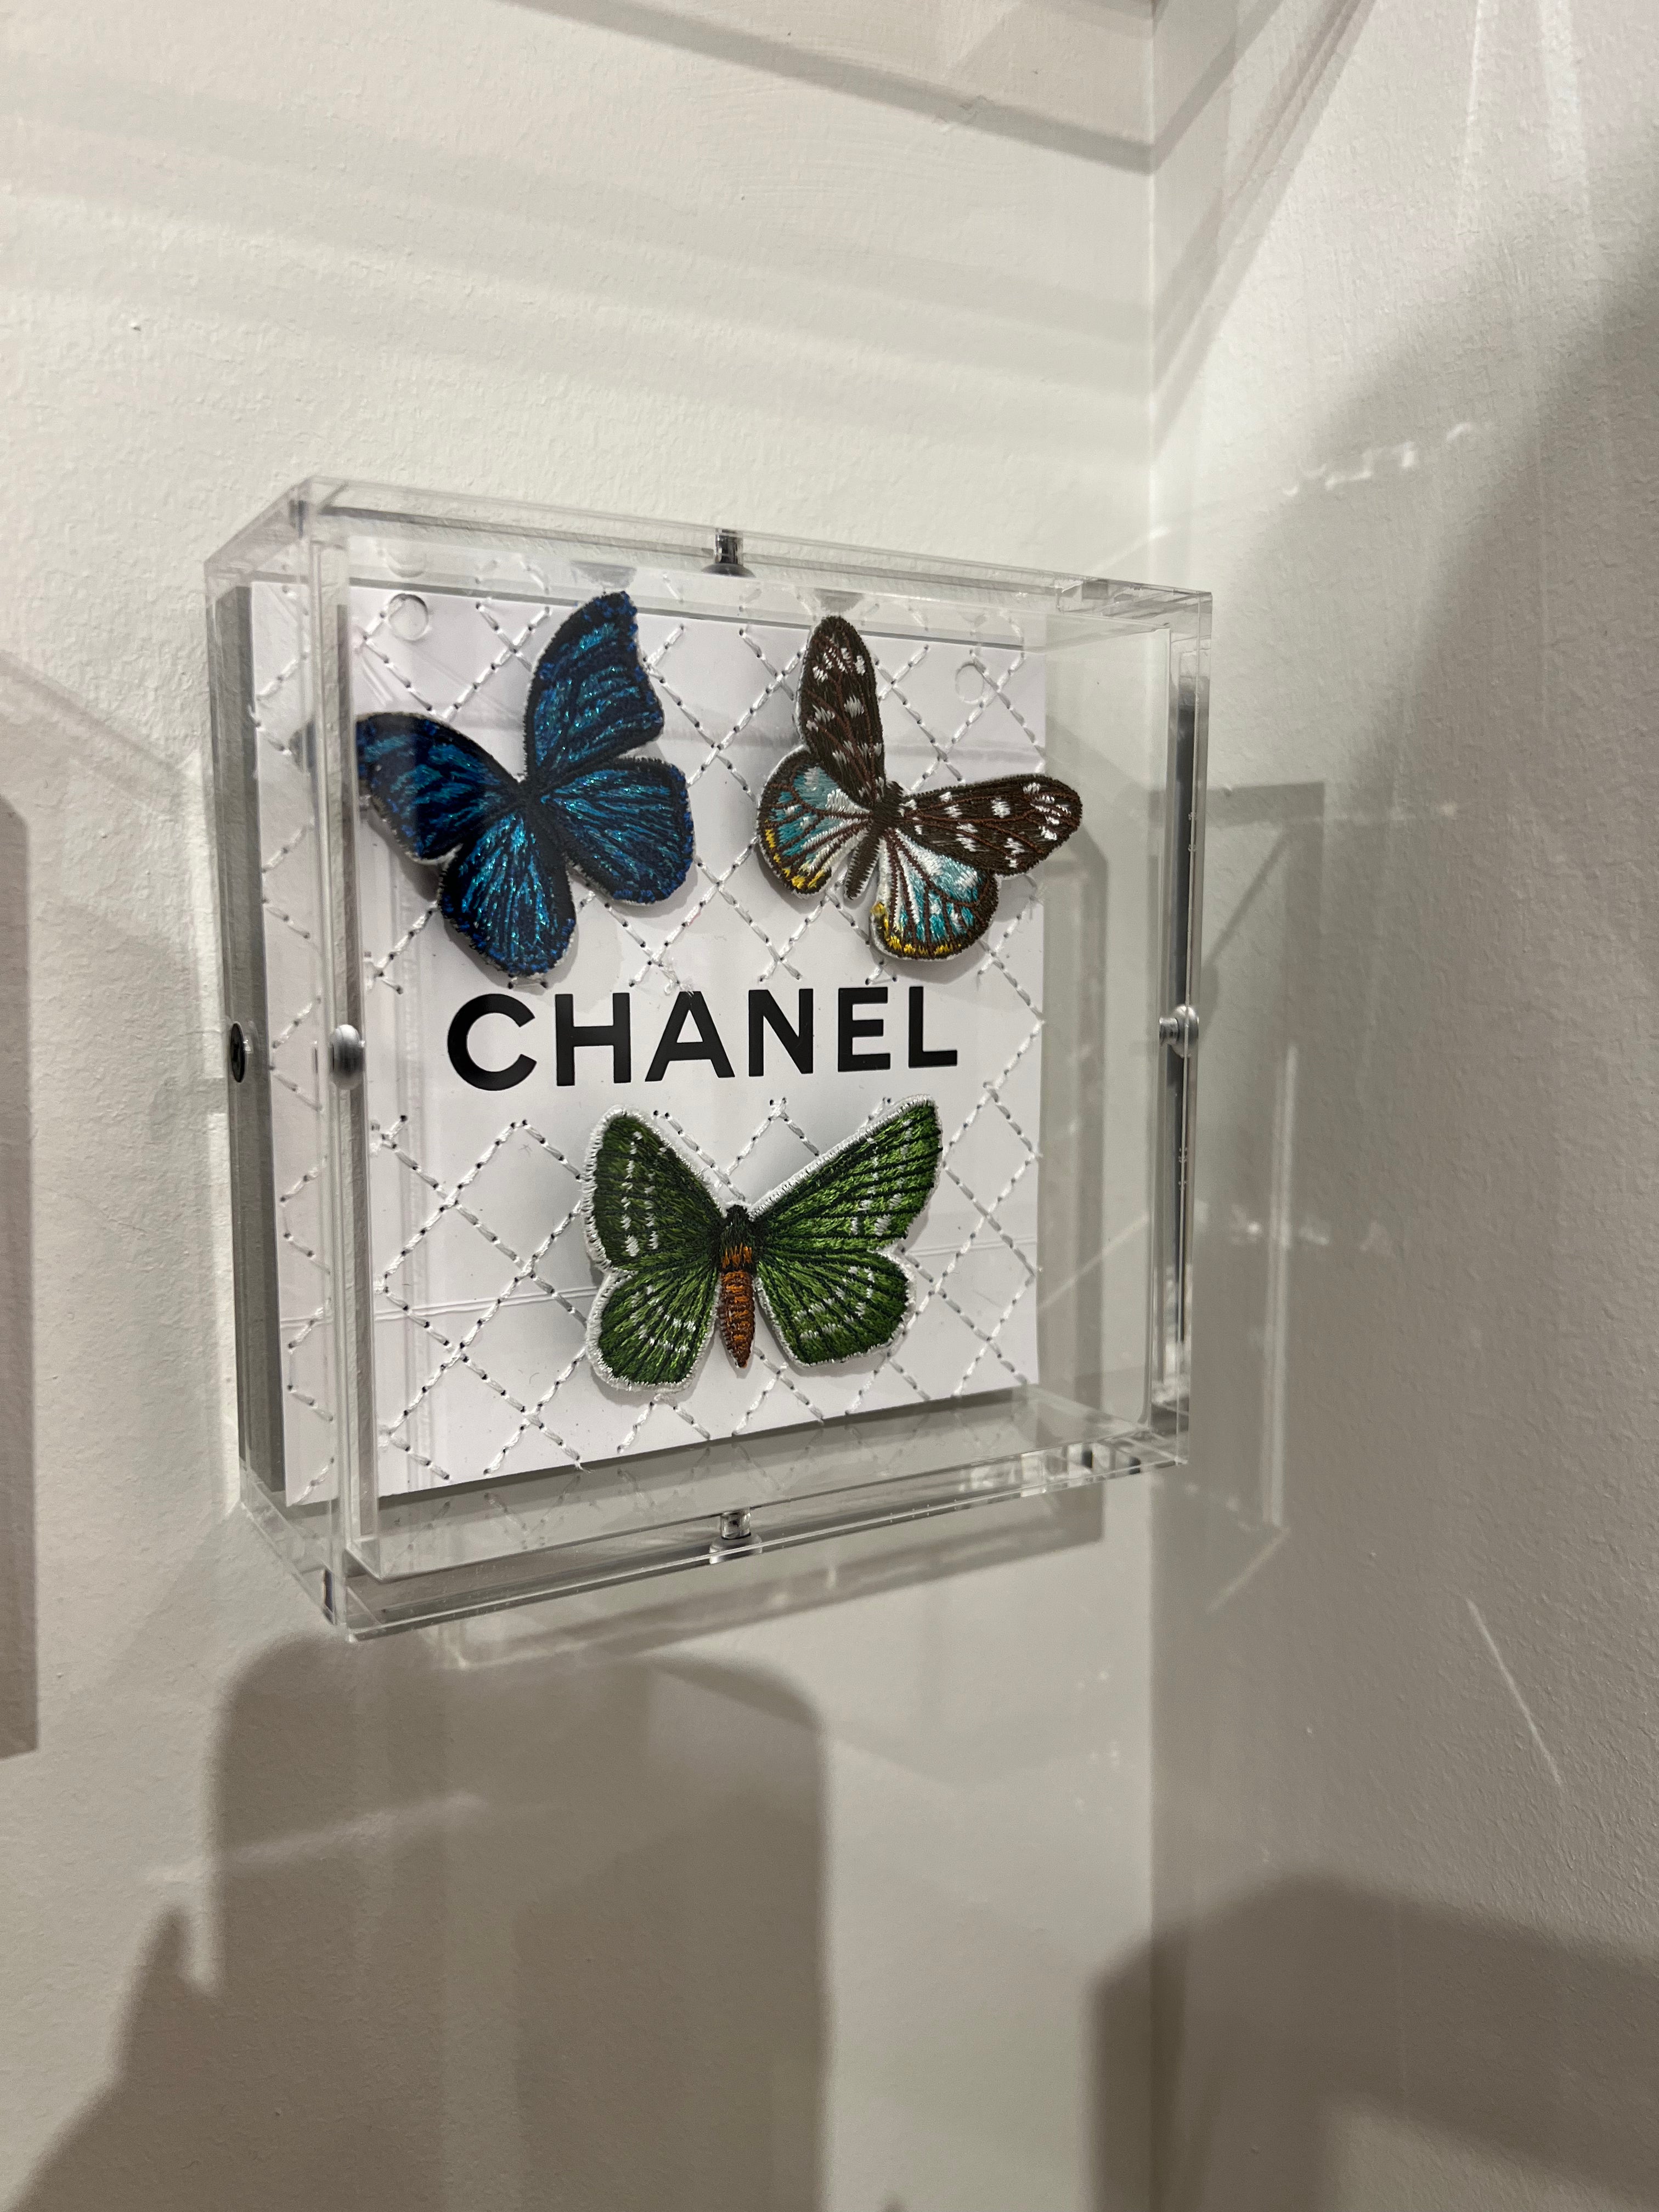 Petite White Chanel Butterfly Swarm by Stephen Wilson (5x5x2